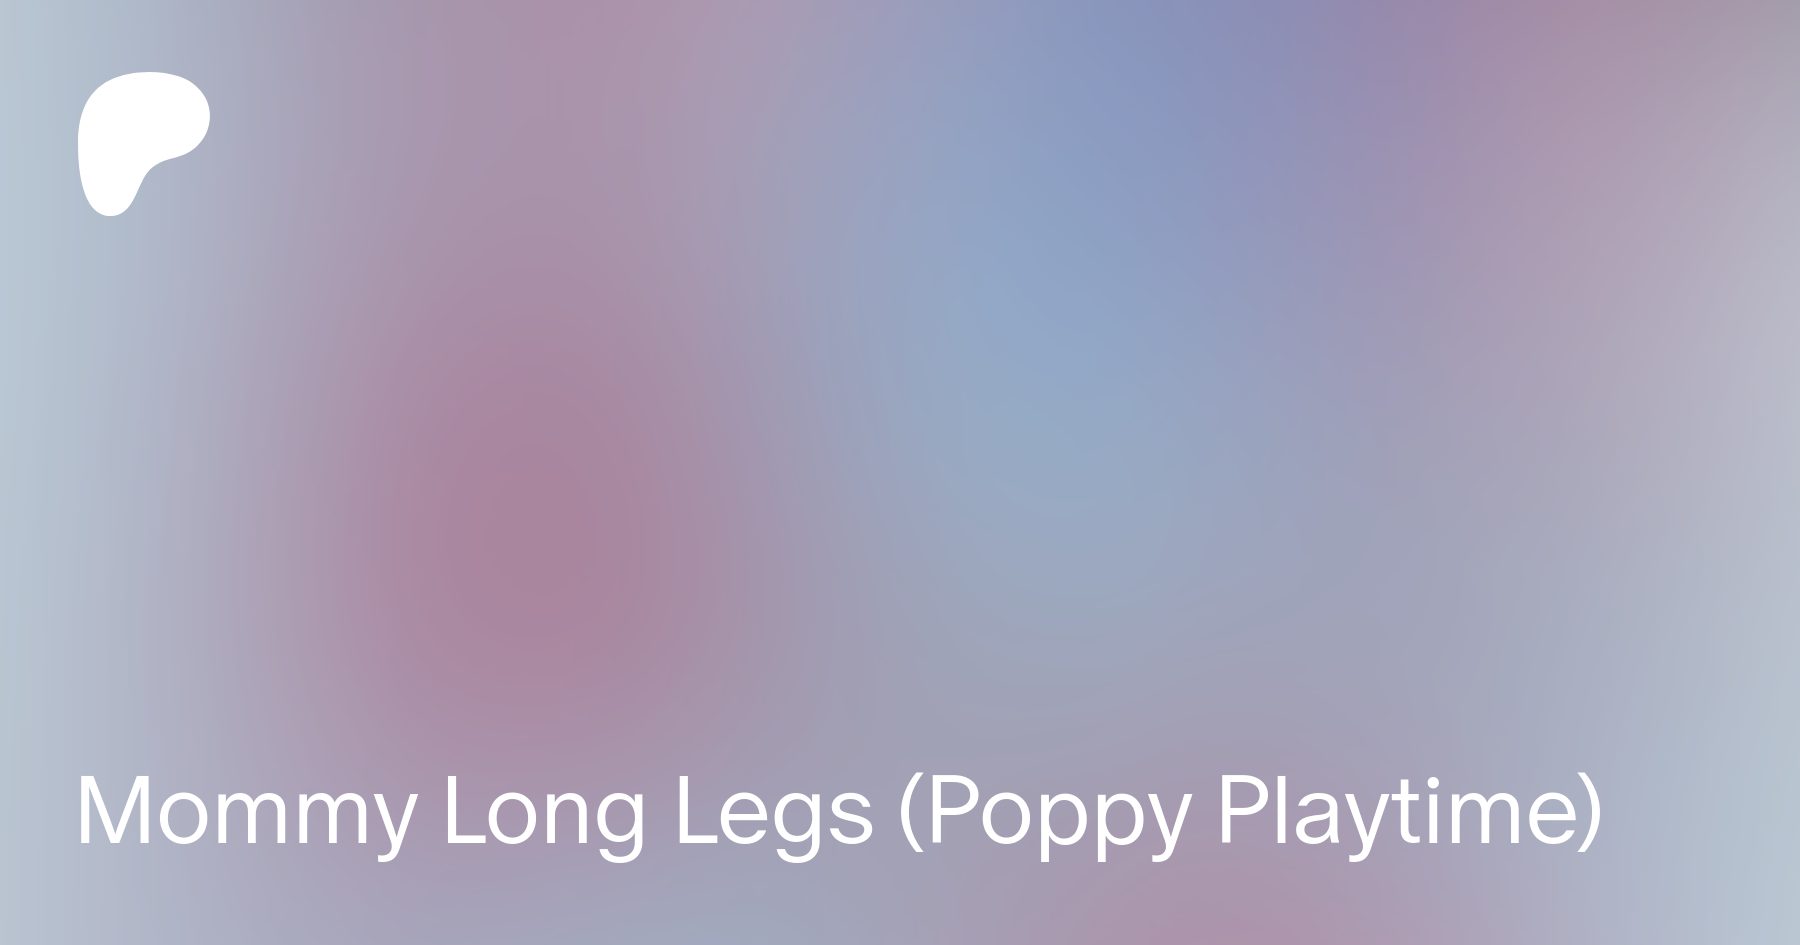 Mommy Long Legs is British. (P.S: Found this on the Poppy Playtime